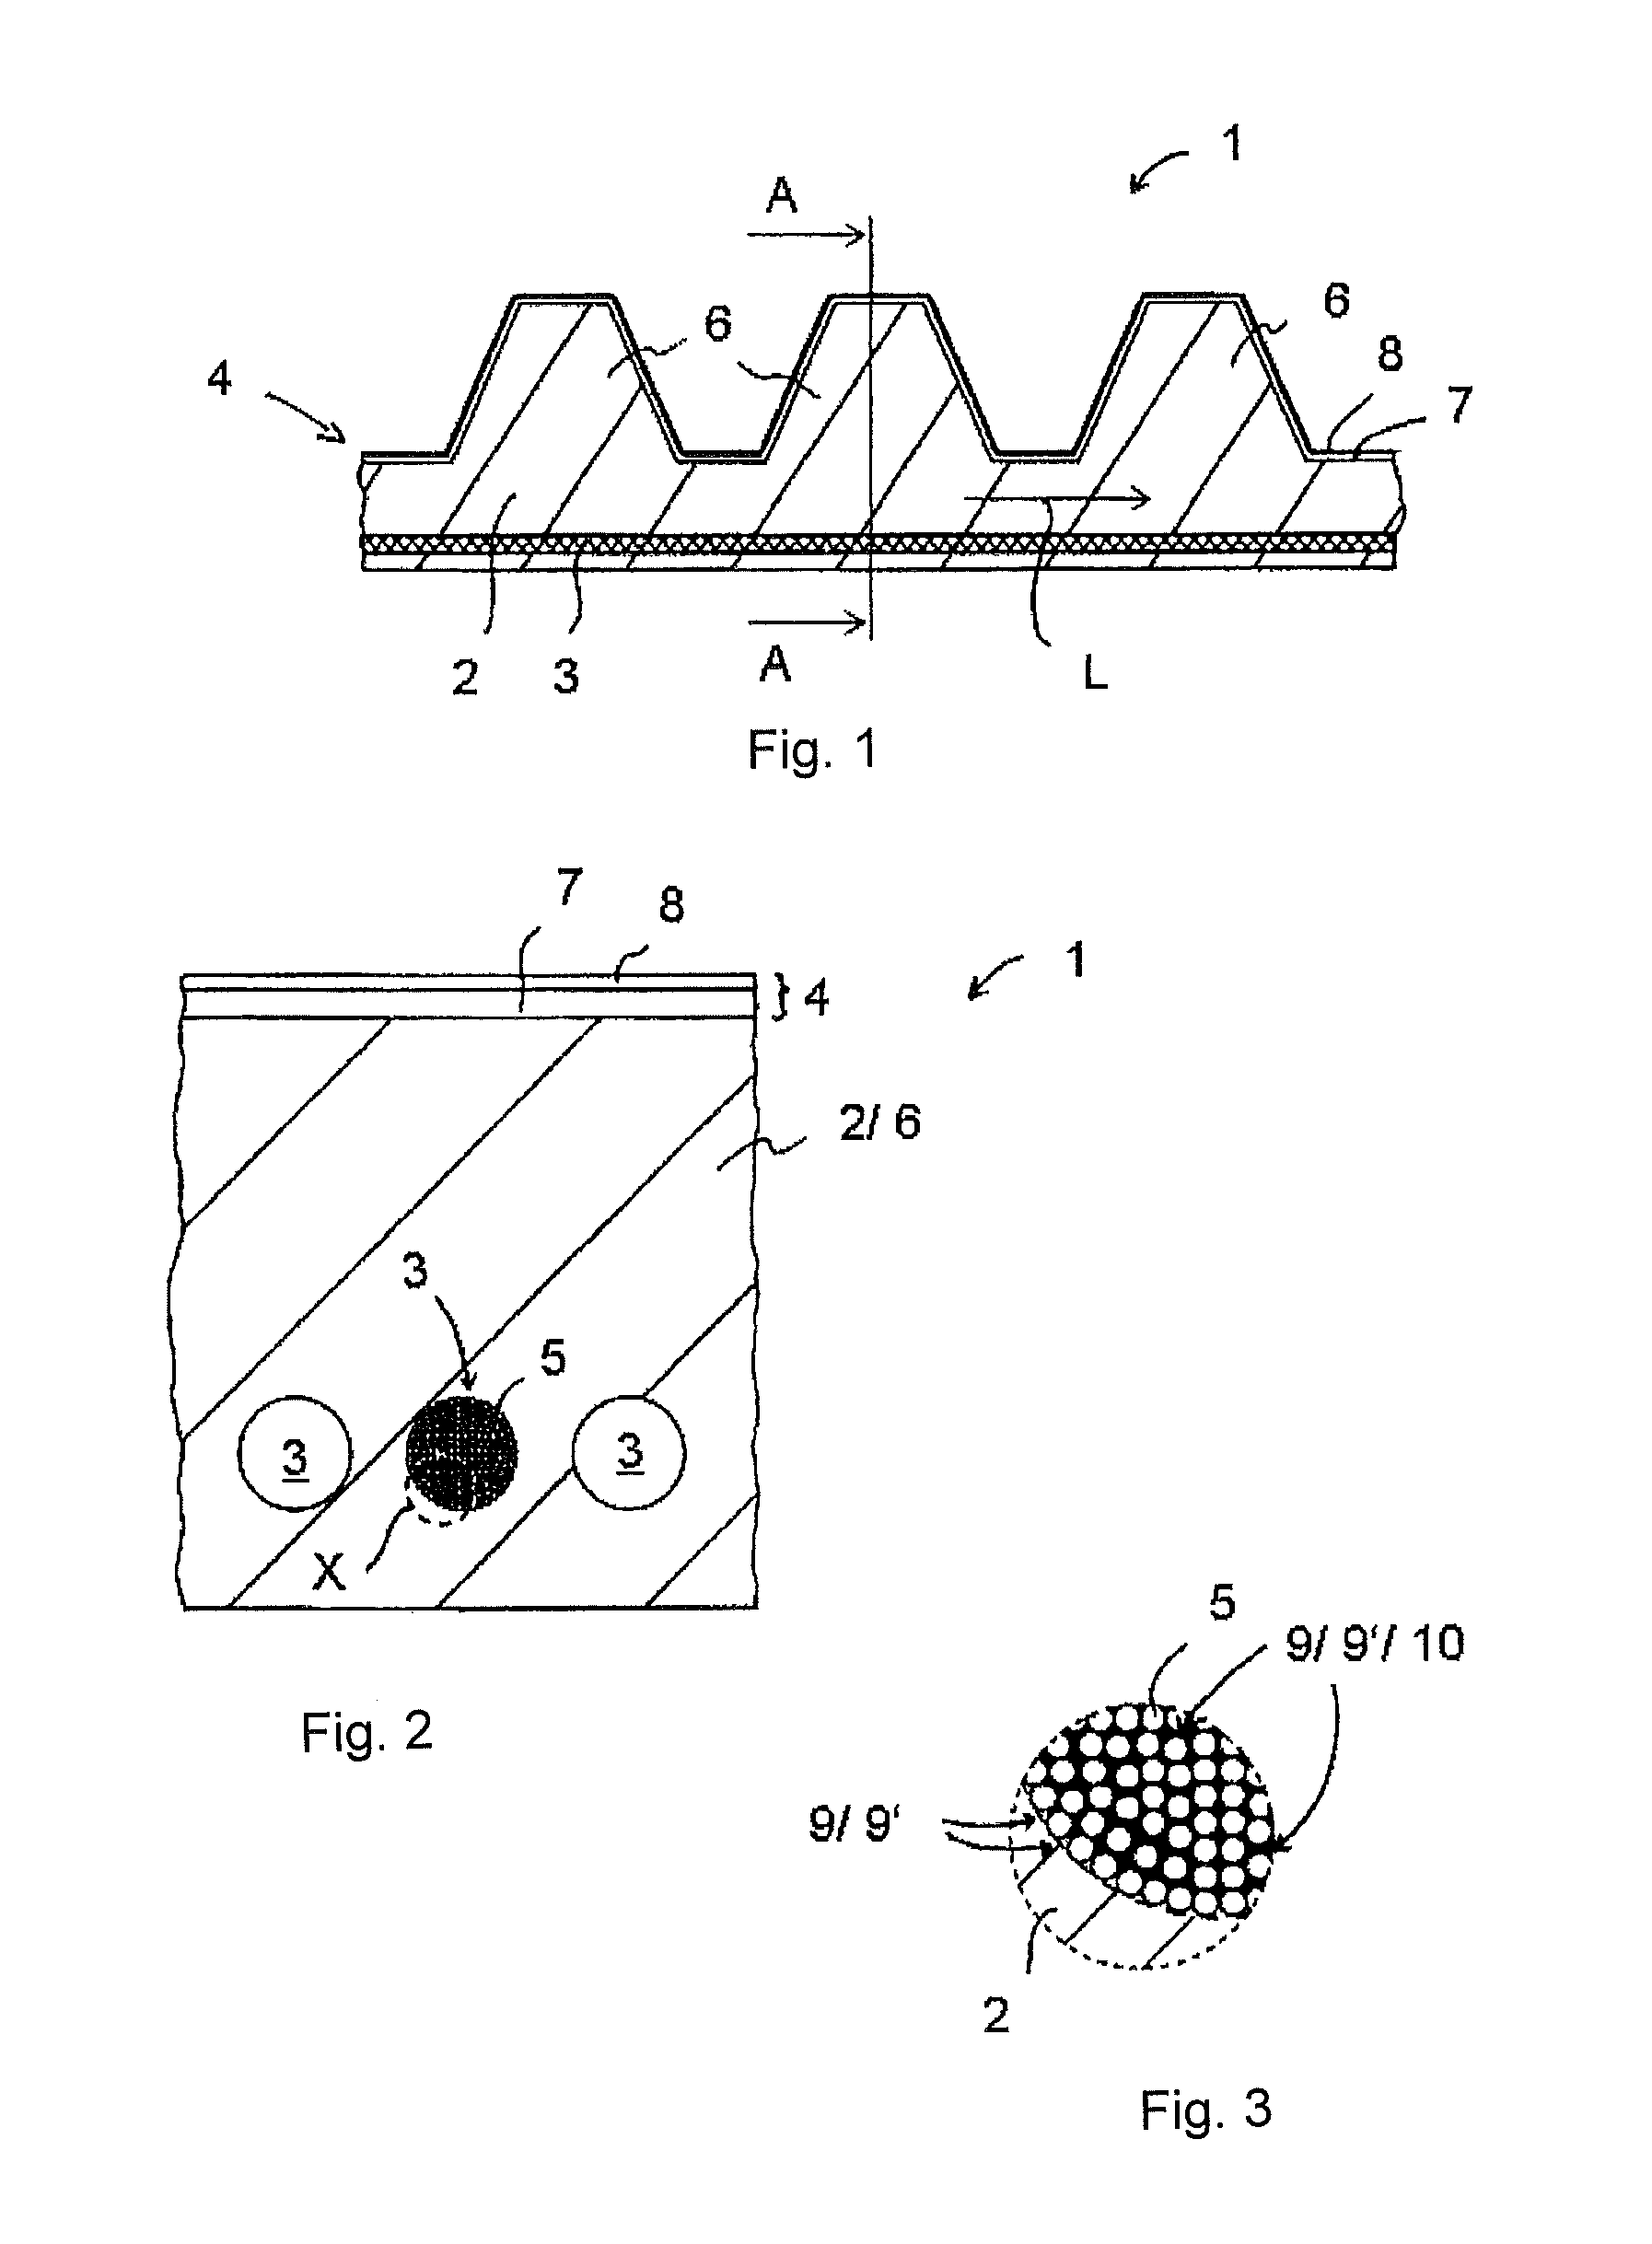 Drive belt for transmitting a drive movement, and method for producing a drive belt